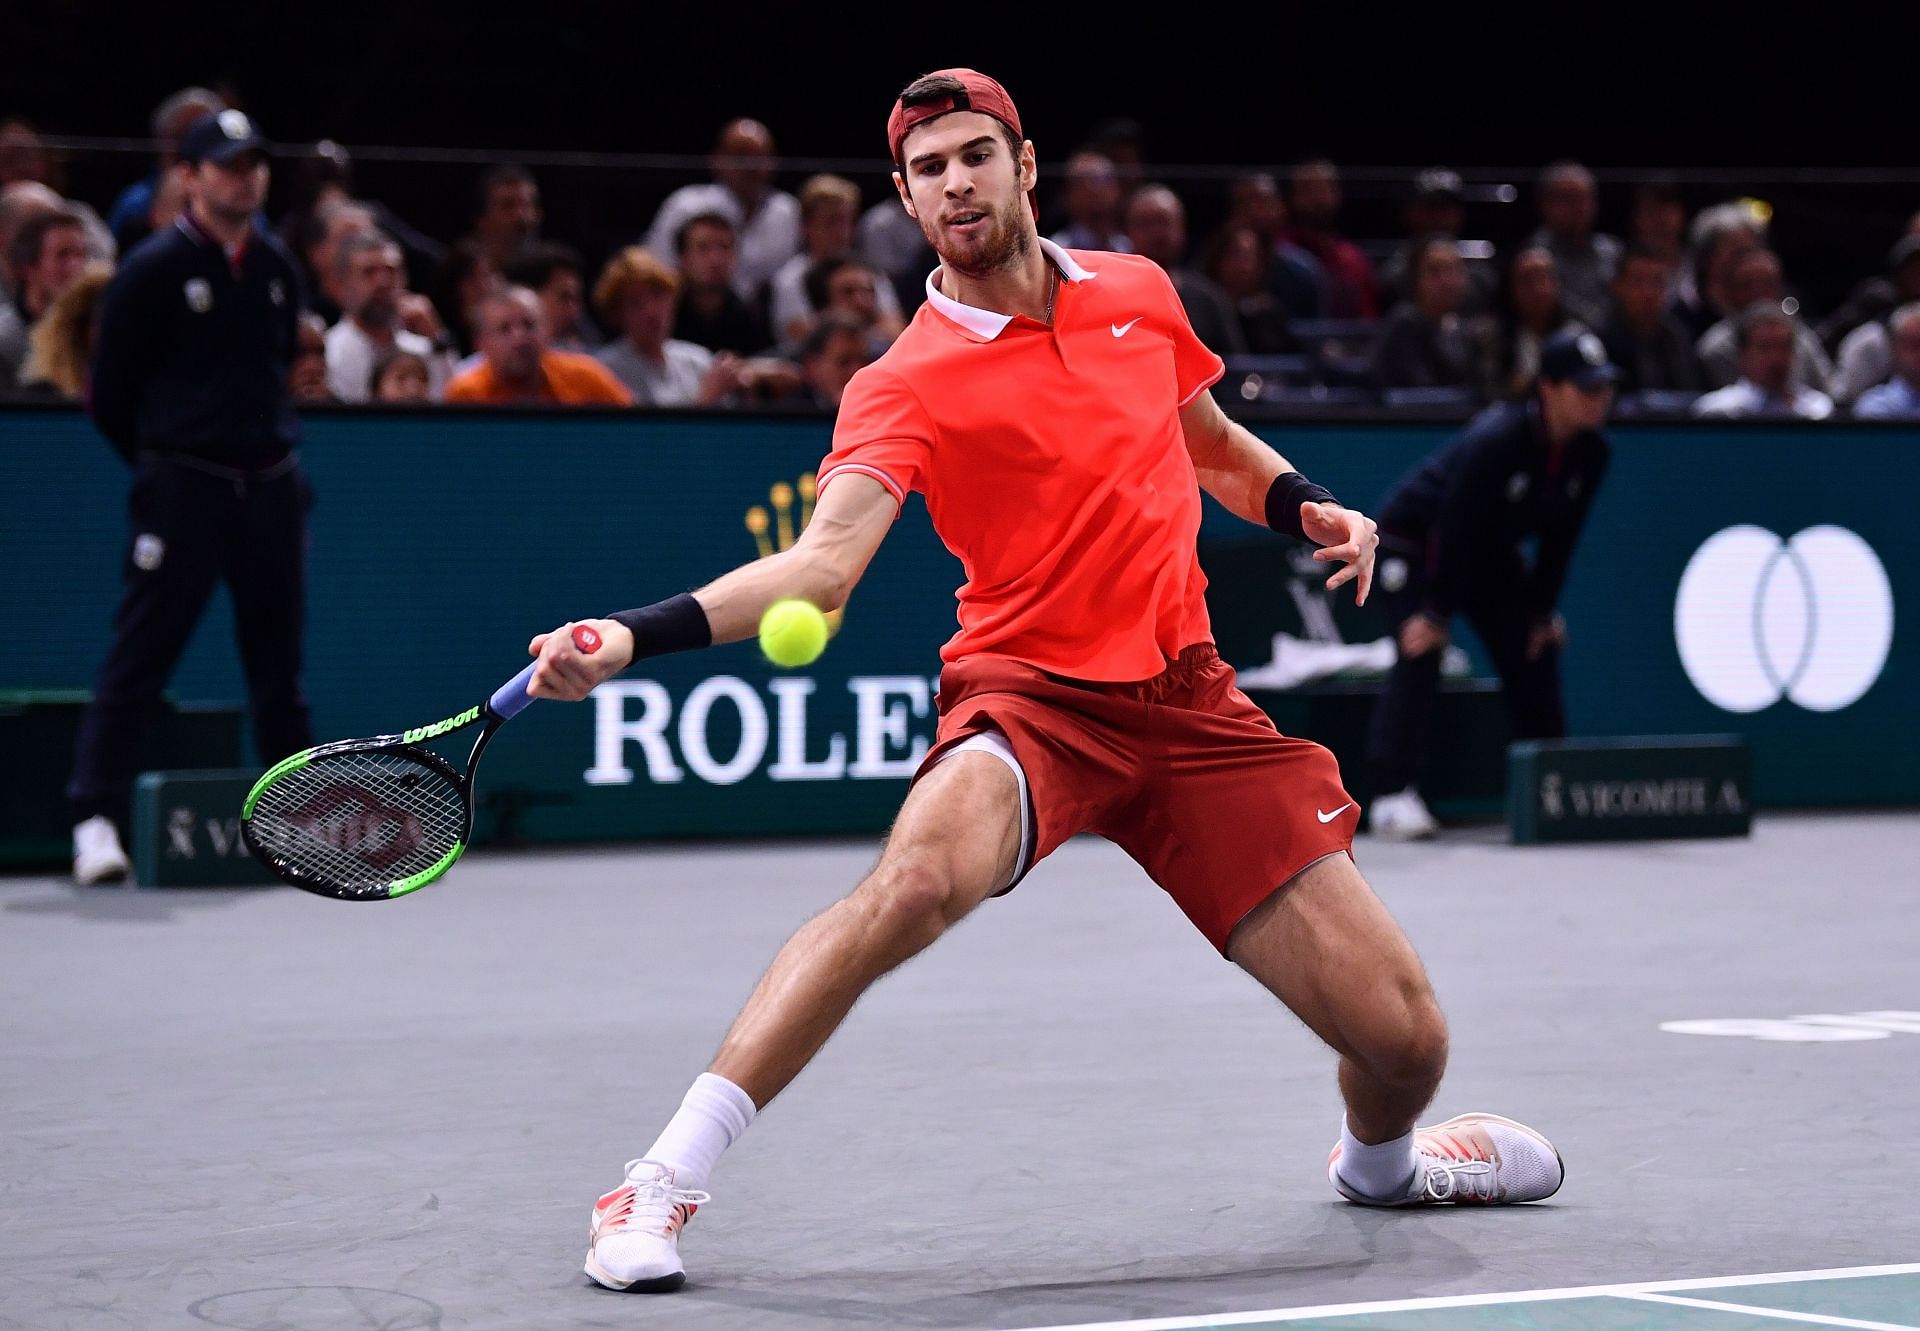 Khachanov scored a straight-sets win in his opener.